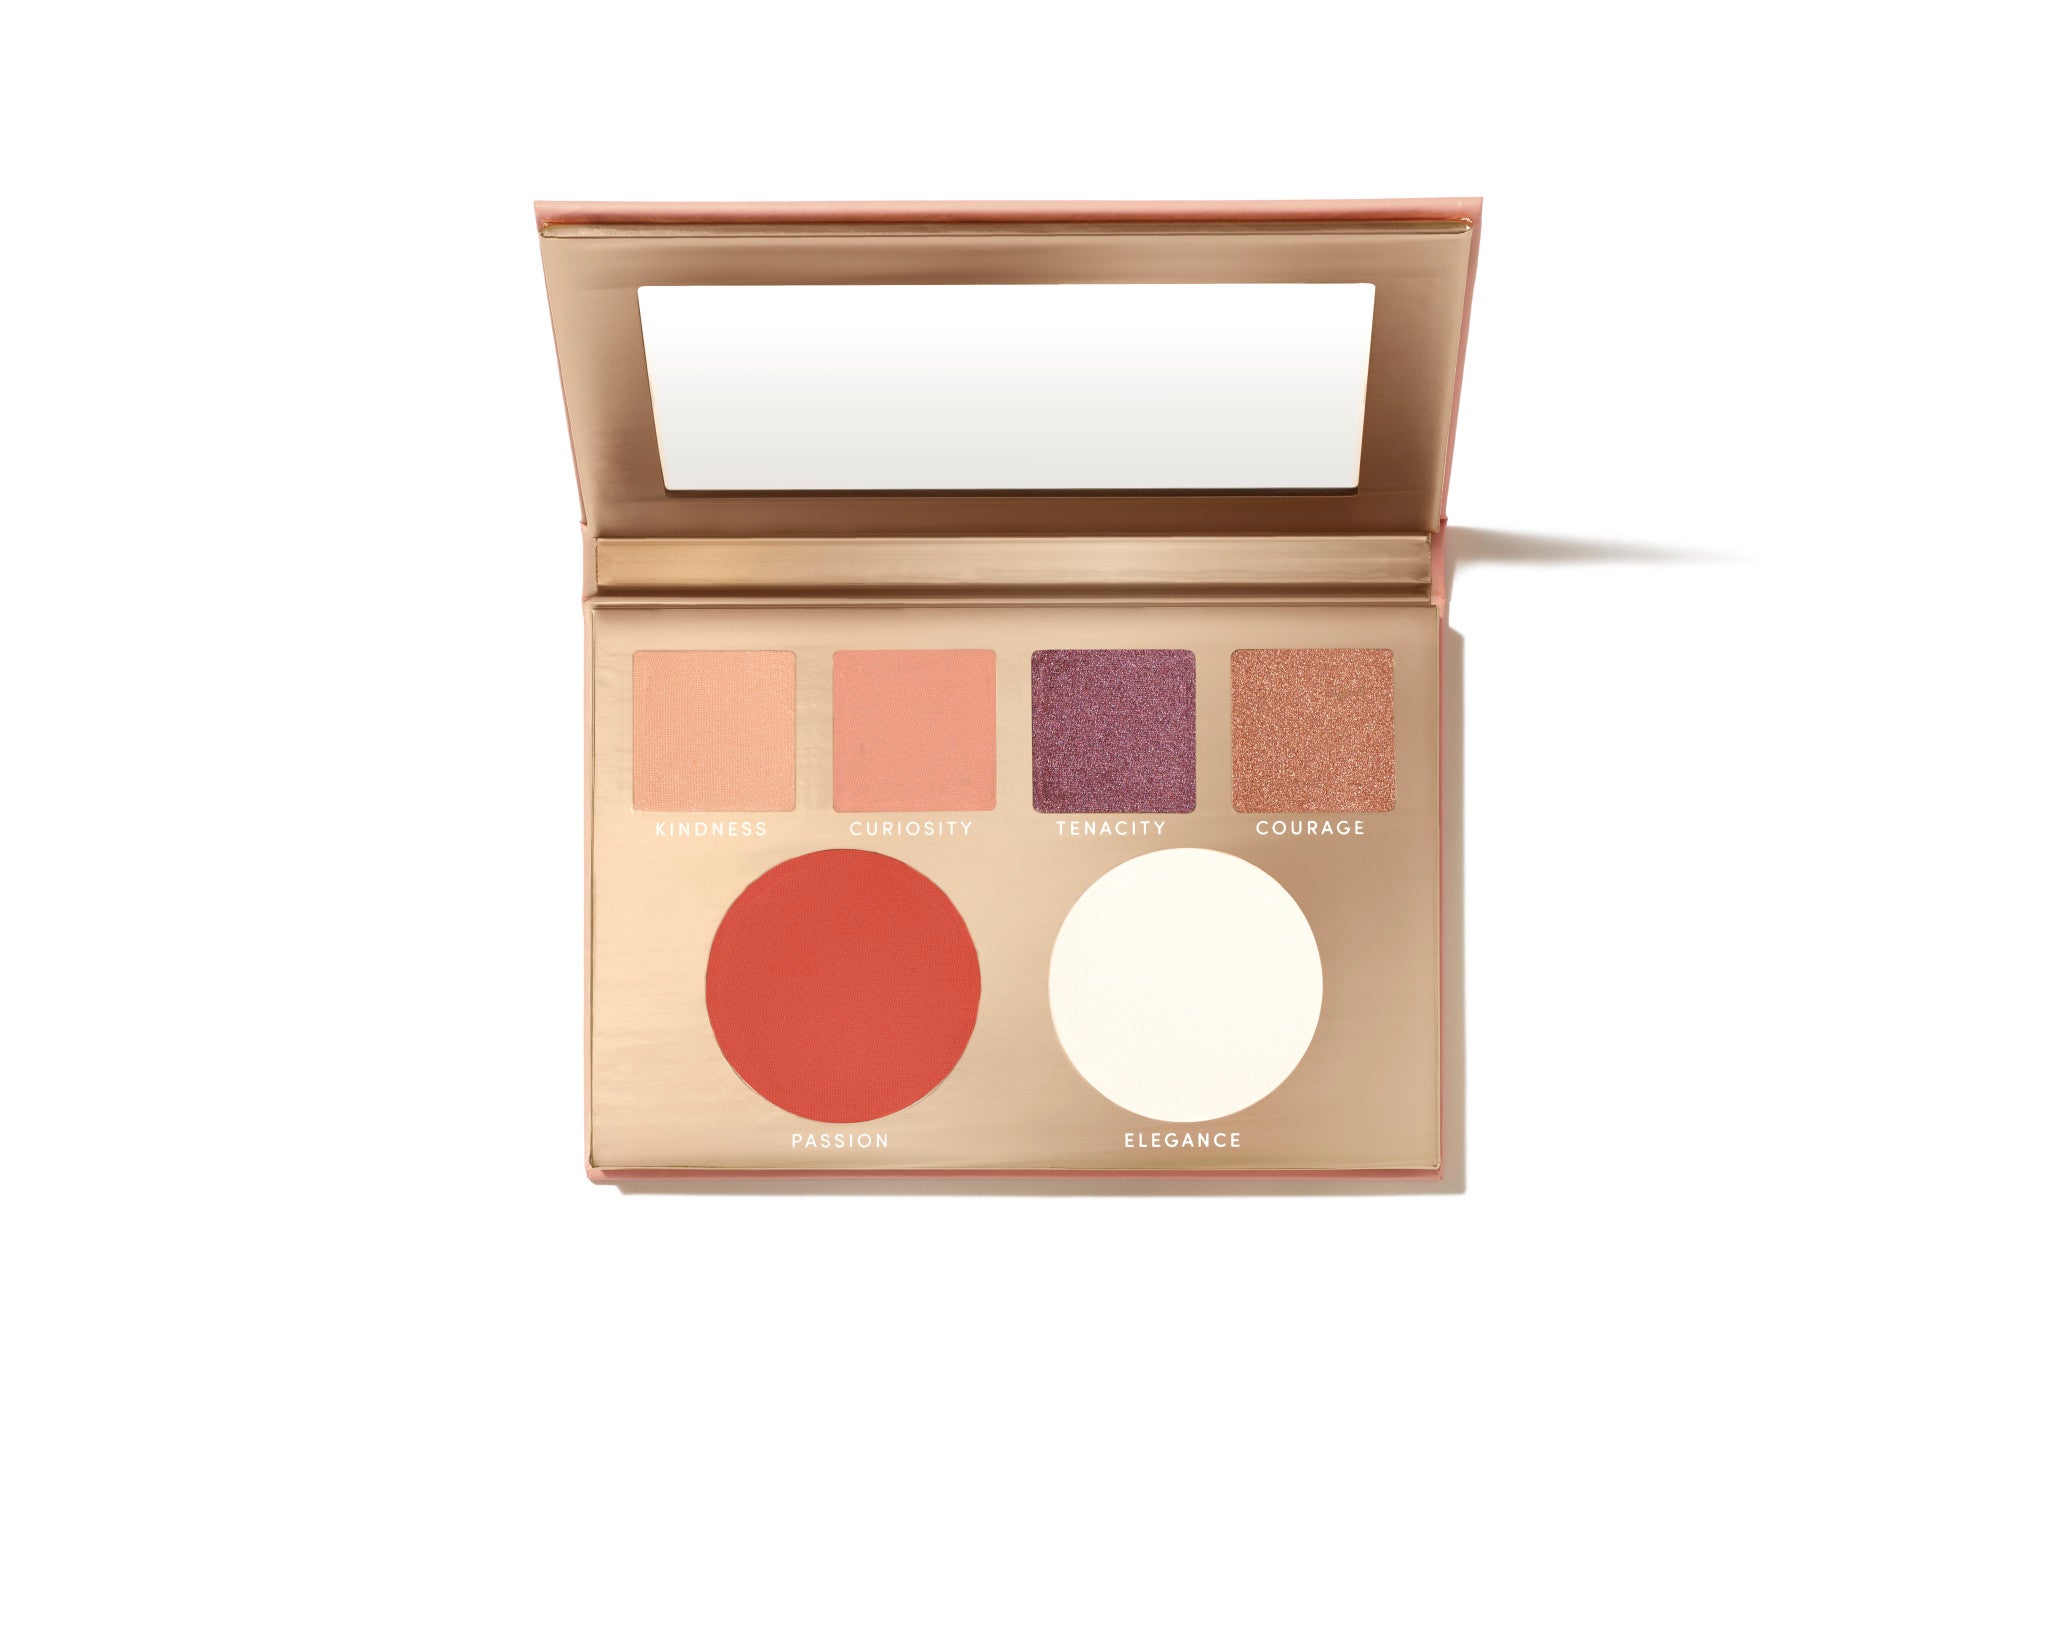 Jane Iredale Reflections Face Palette (Limited Edition) main image. This product is in the color multi